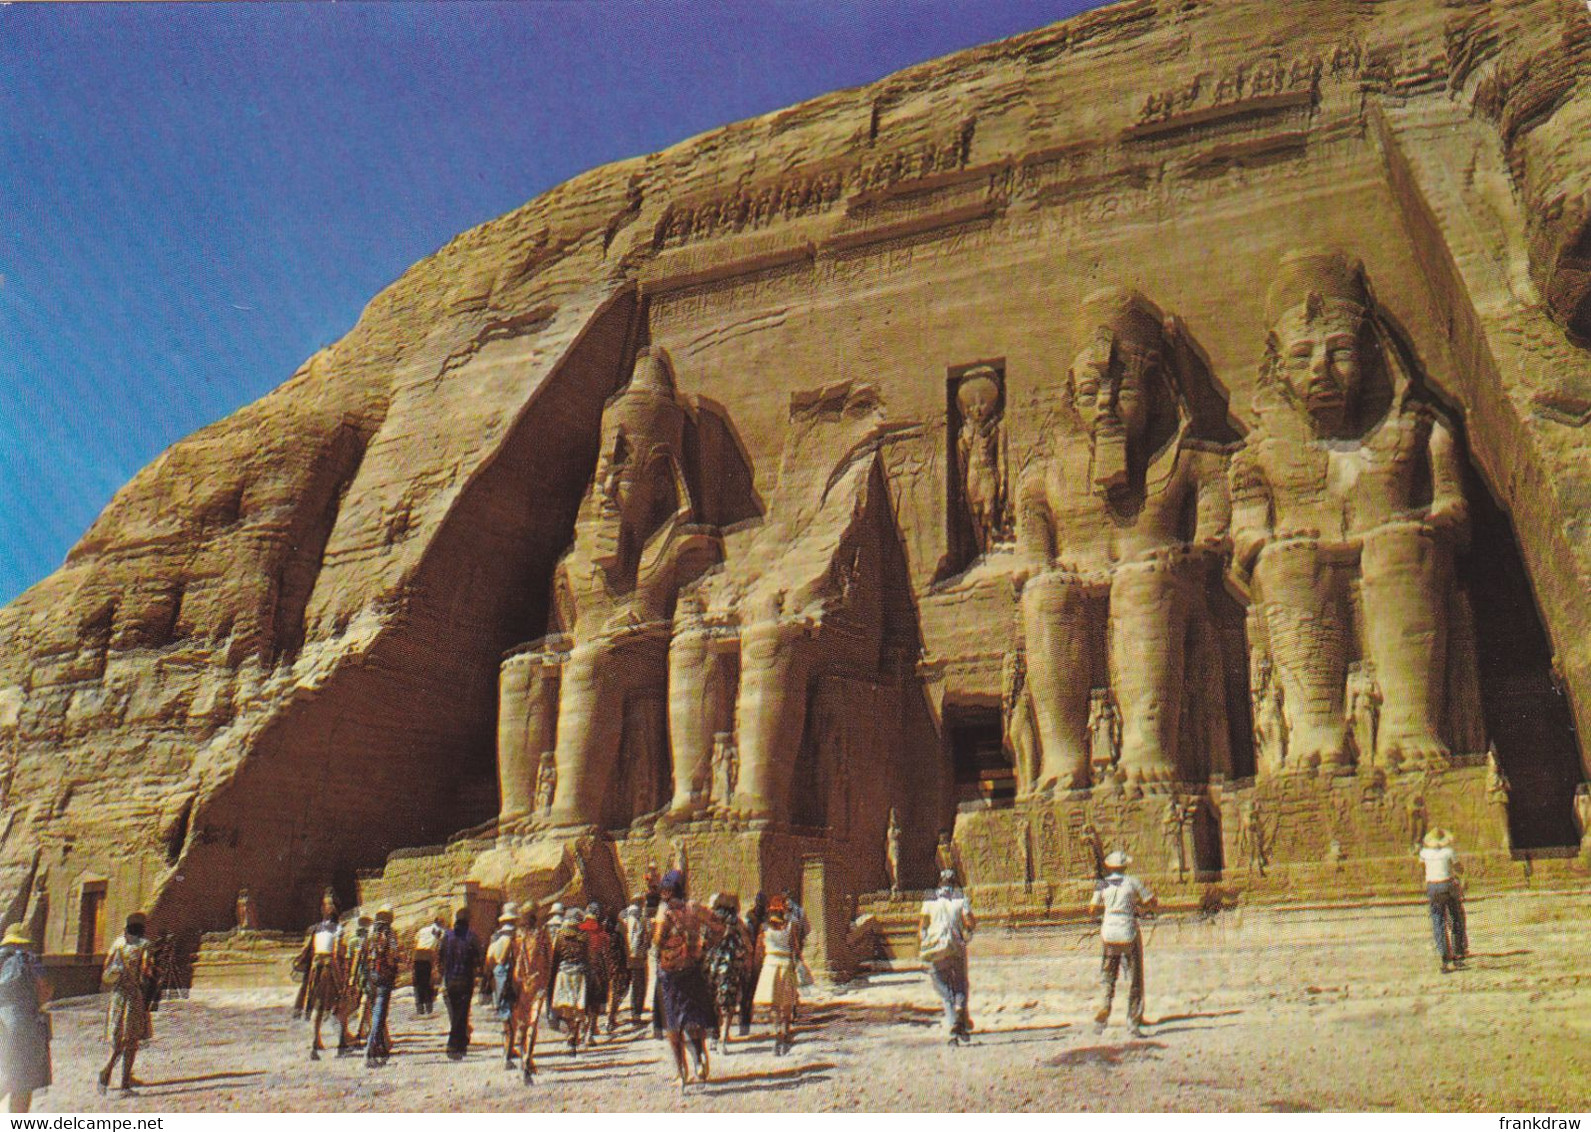 Postcard - Egypt - Abu-Simbel, General View Of The Temple - Very Good - Unclassified